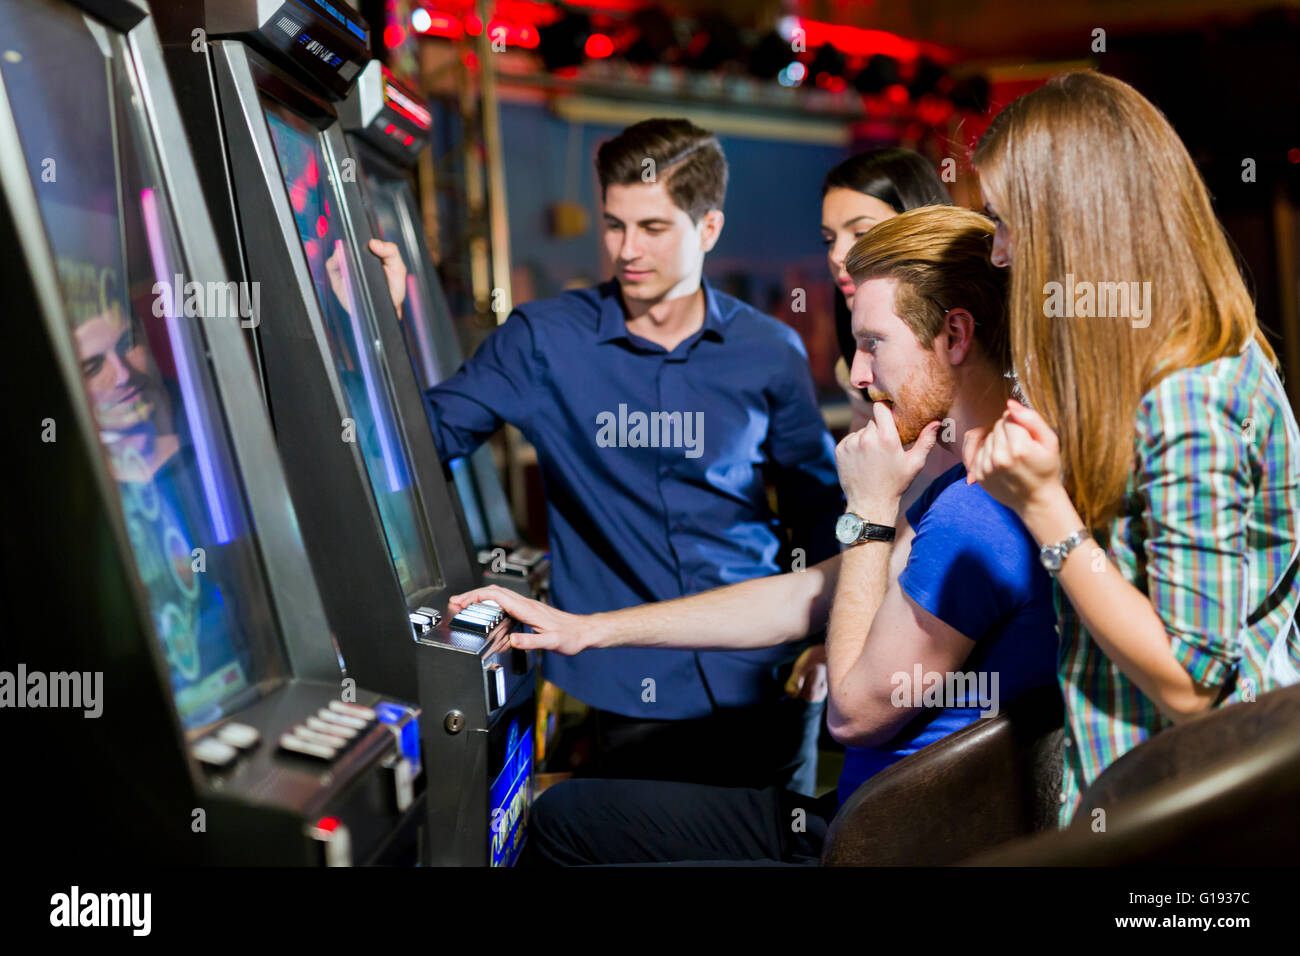 Young group of people gambling in a casino playing slot and various machines Stock Photo